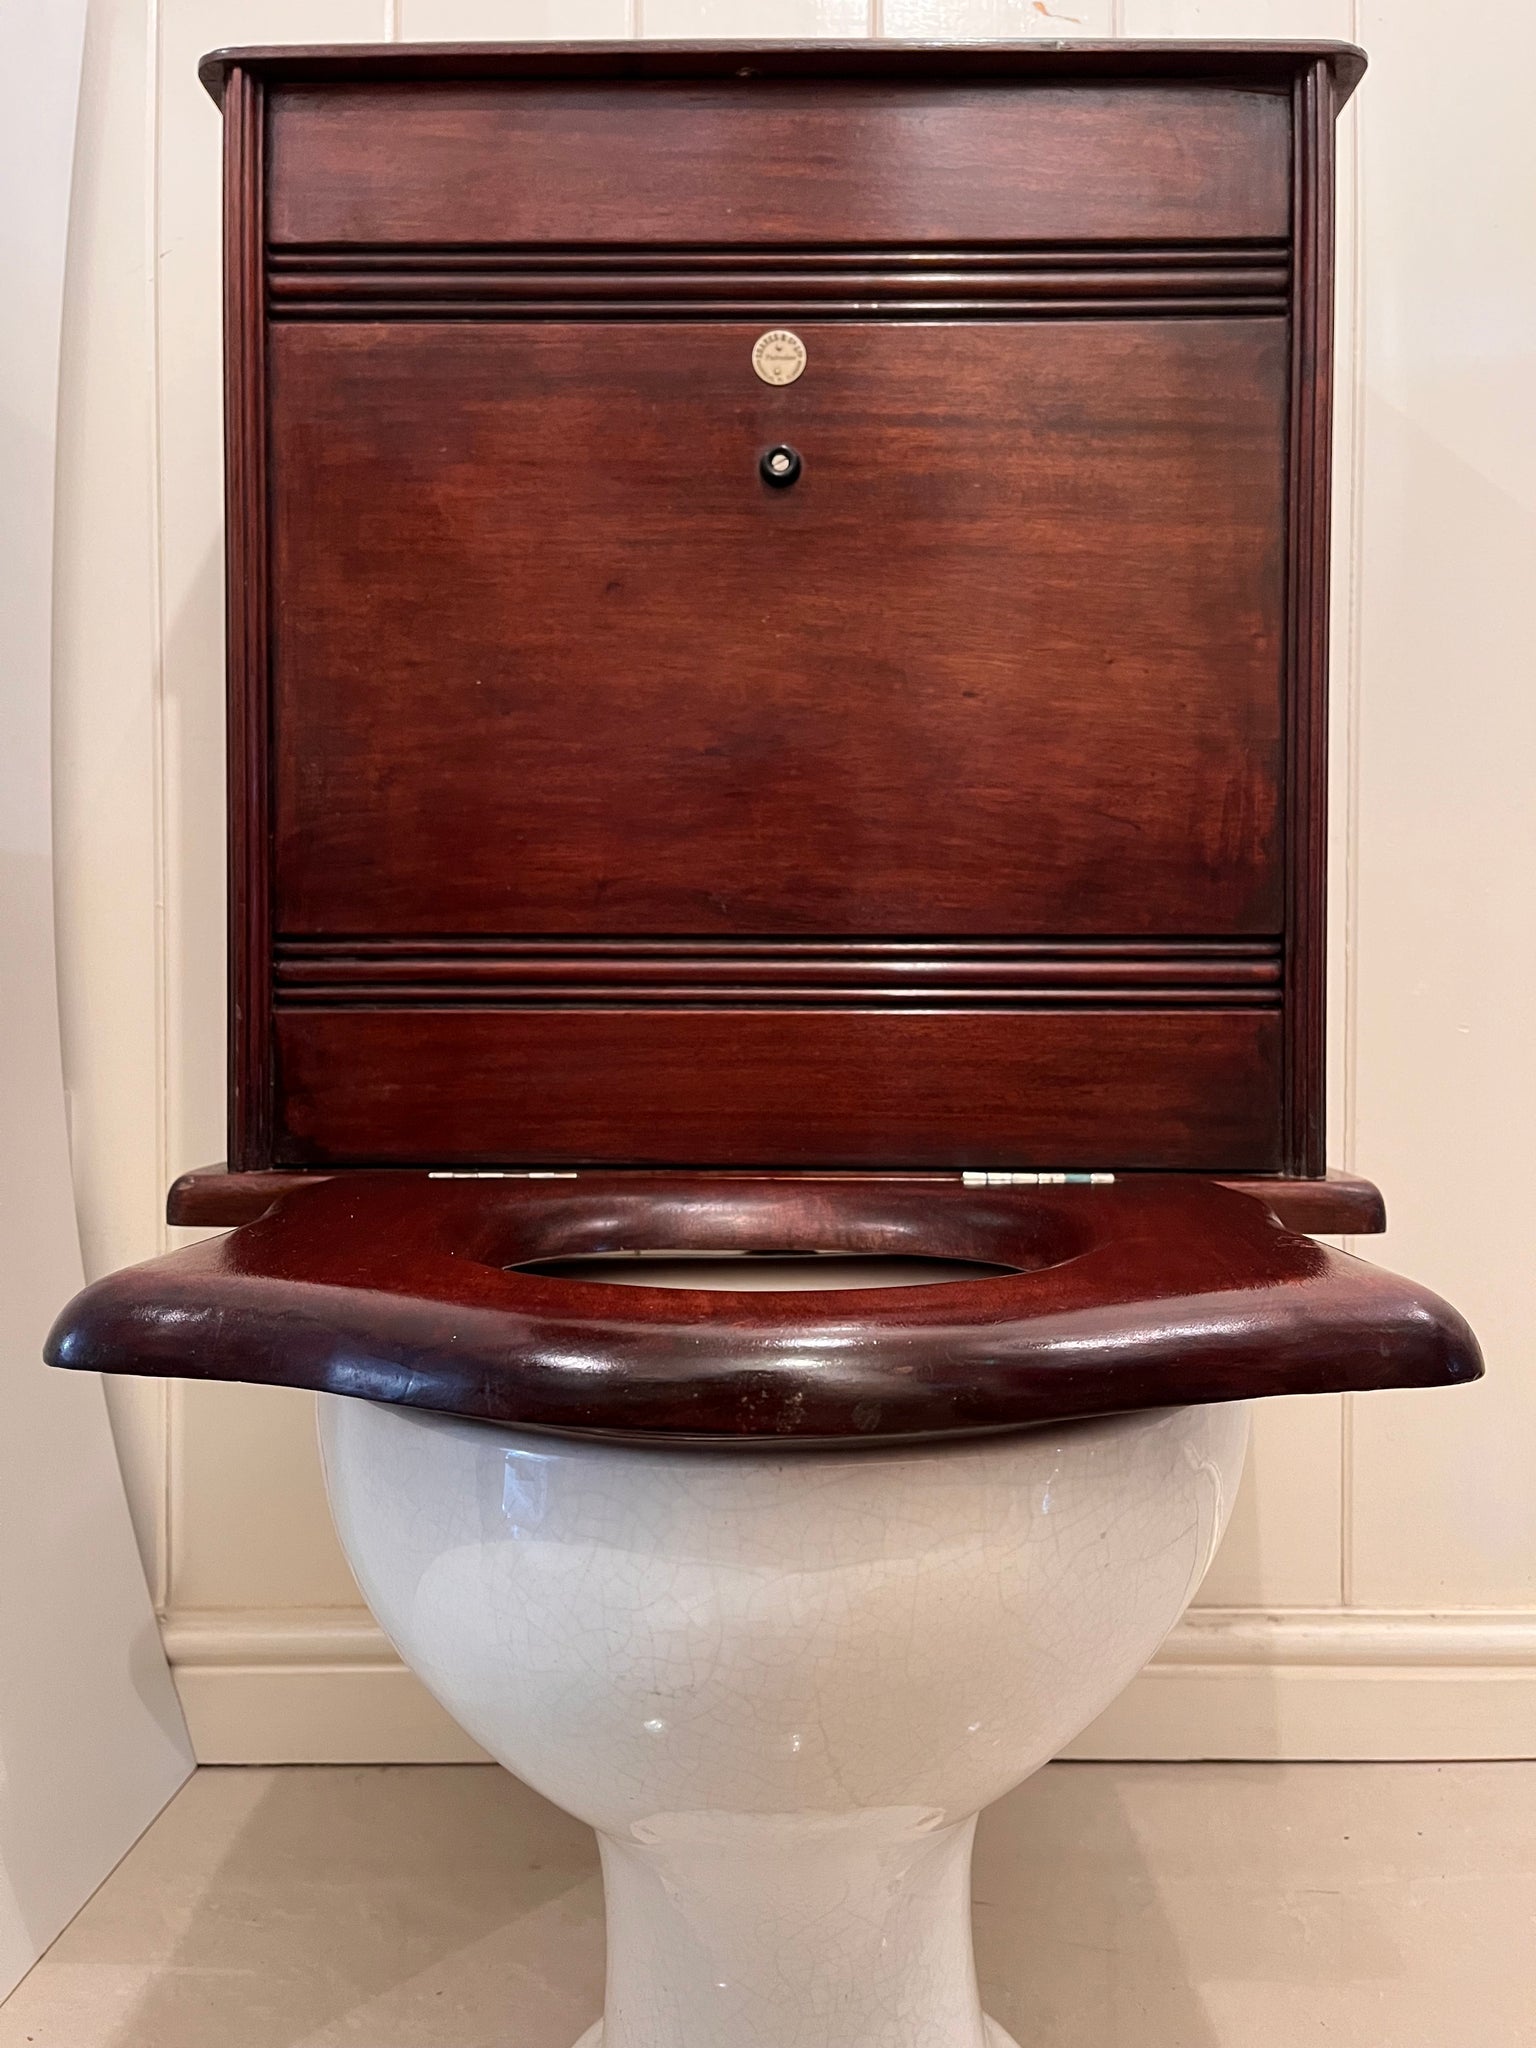 "ANGLIA" Washdown Closet by Shanks & Co Ltd C.1900 with a Mahogany Boxed in Cast Iron Cistern